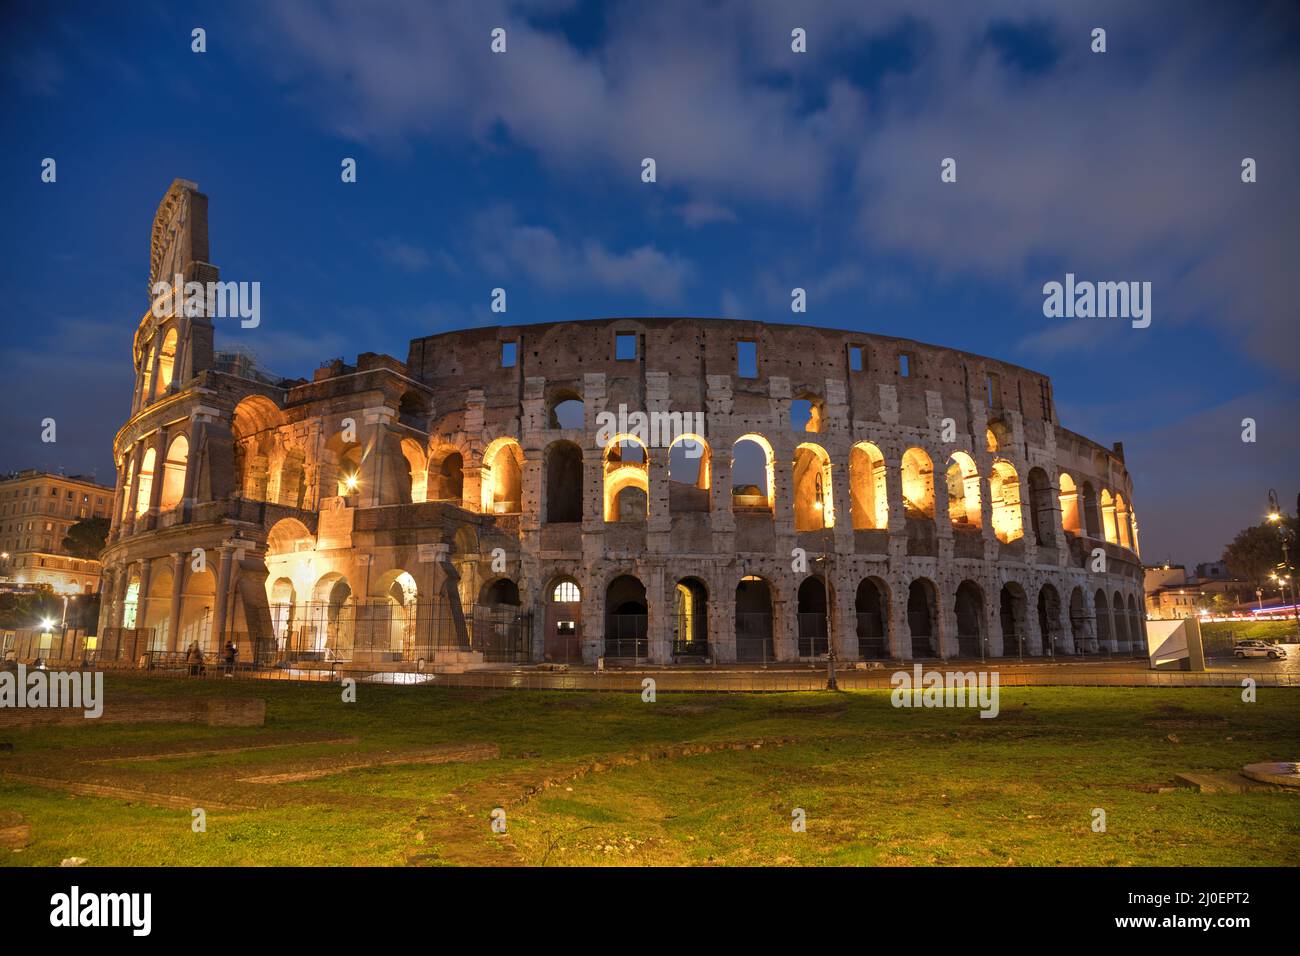 The Colosseum or Flavian Amphitheatre in Rome, Italy Stock Photo